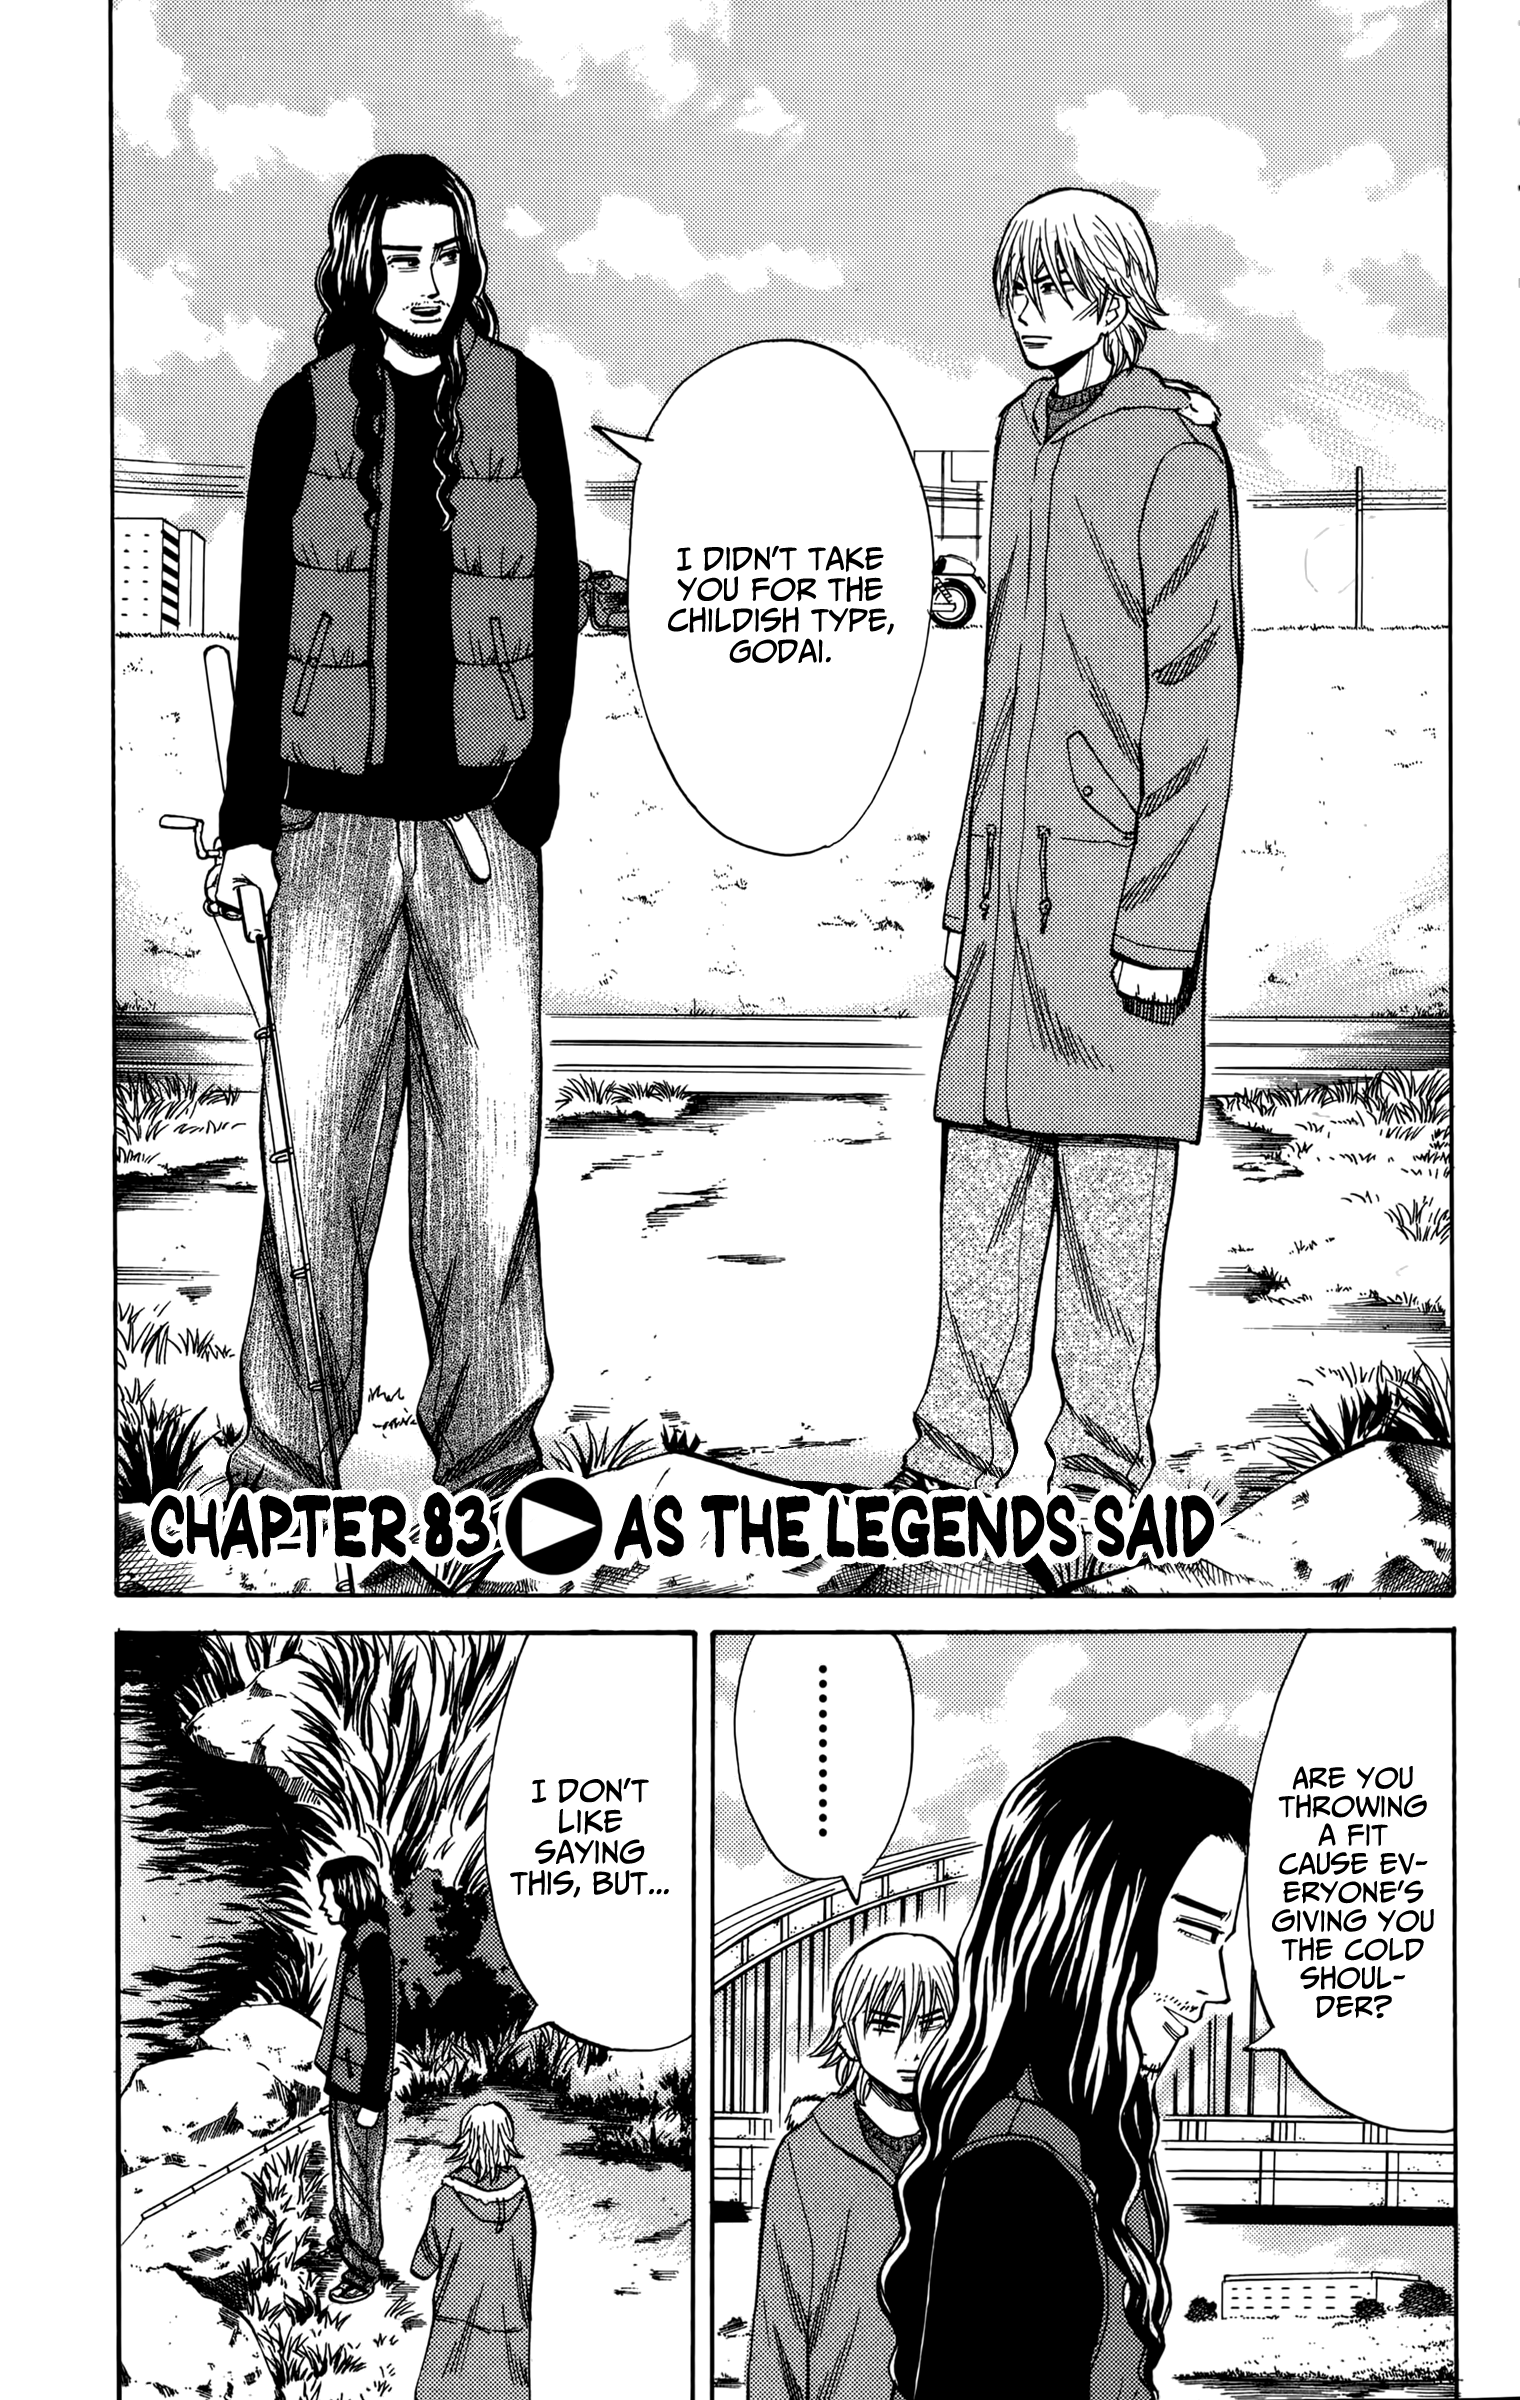 Nanba Mg5 Vol.10 Chapter 83: As The Legends Say - Picture 1